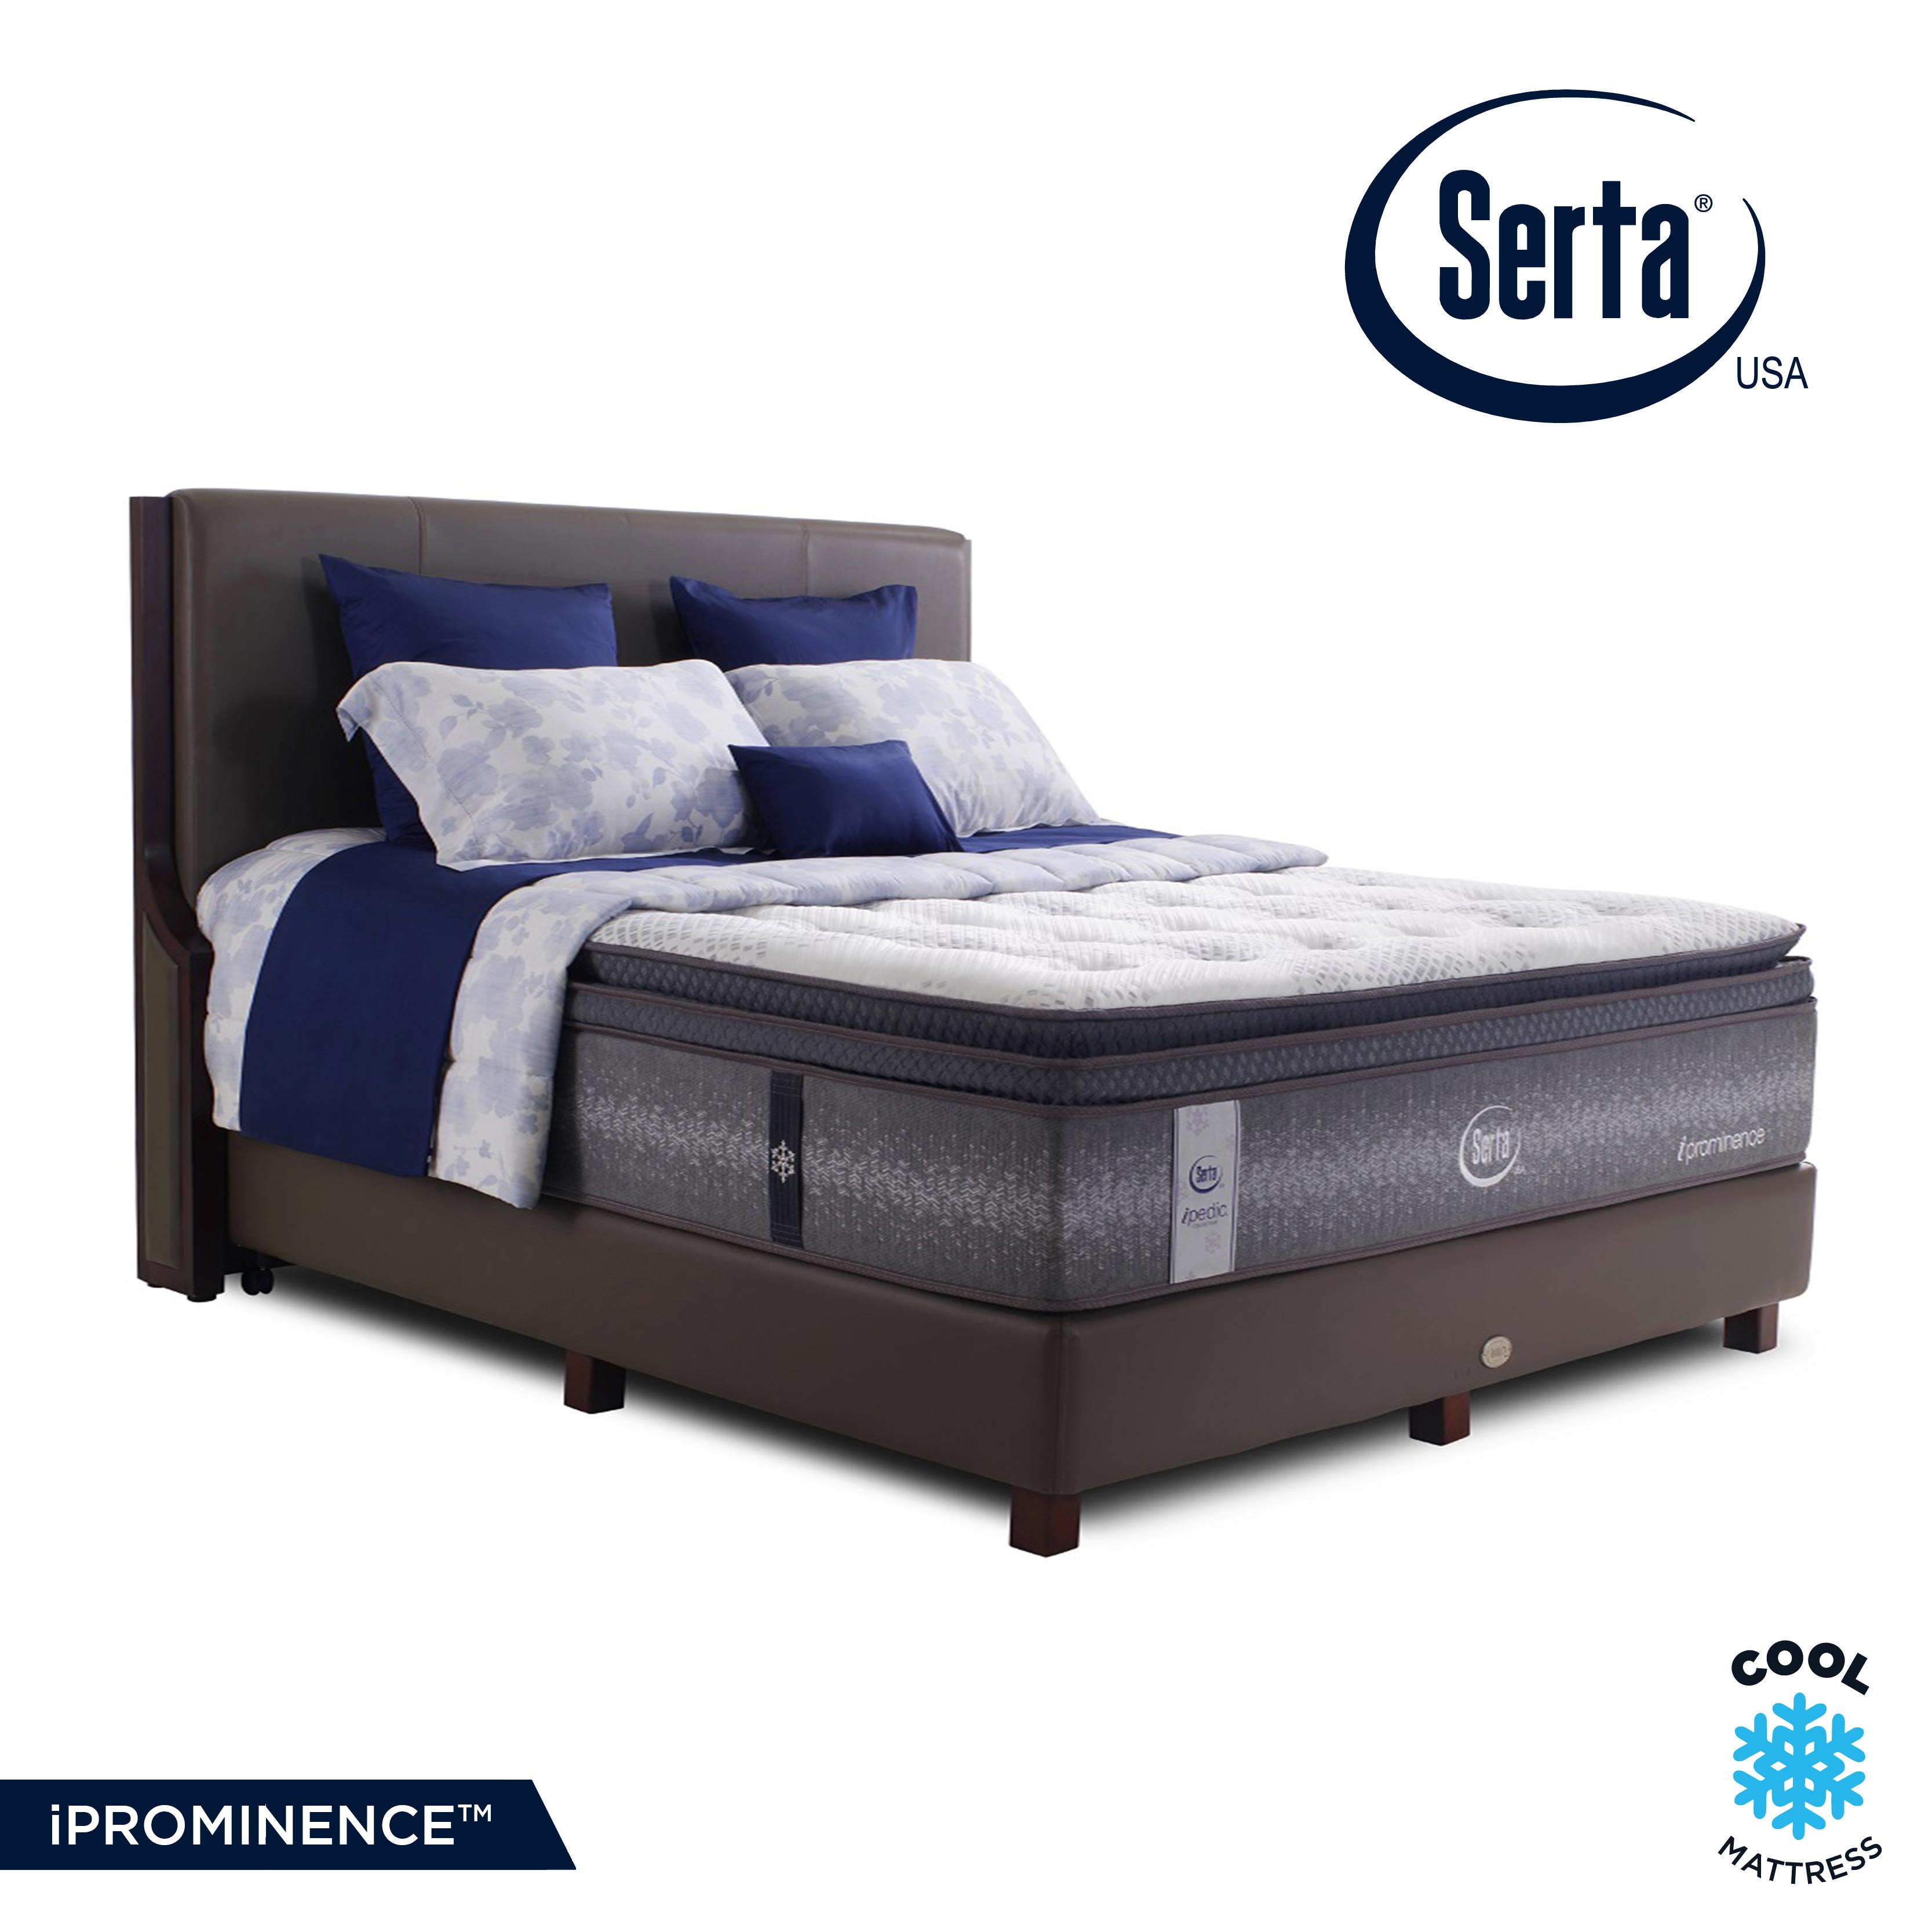 Serta Spring Bed iProminence - Mattress Only